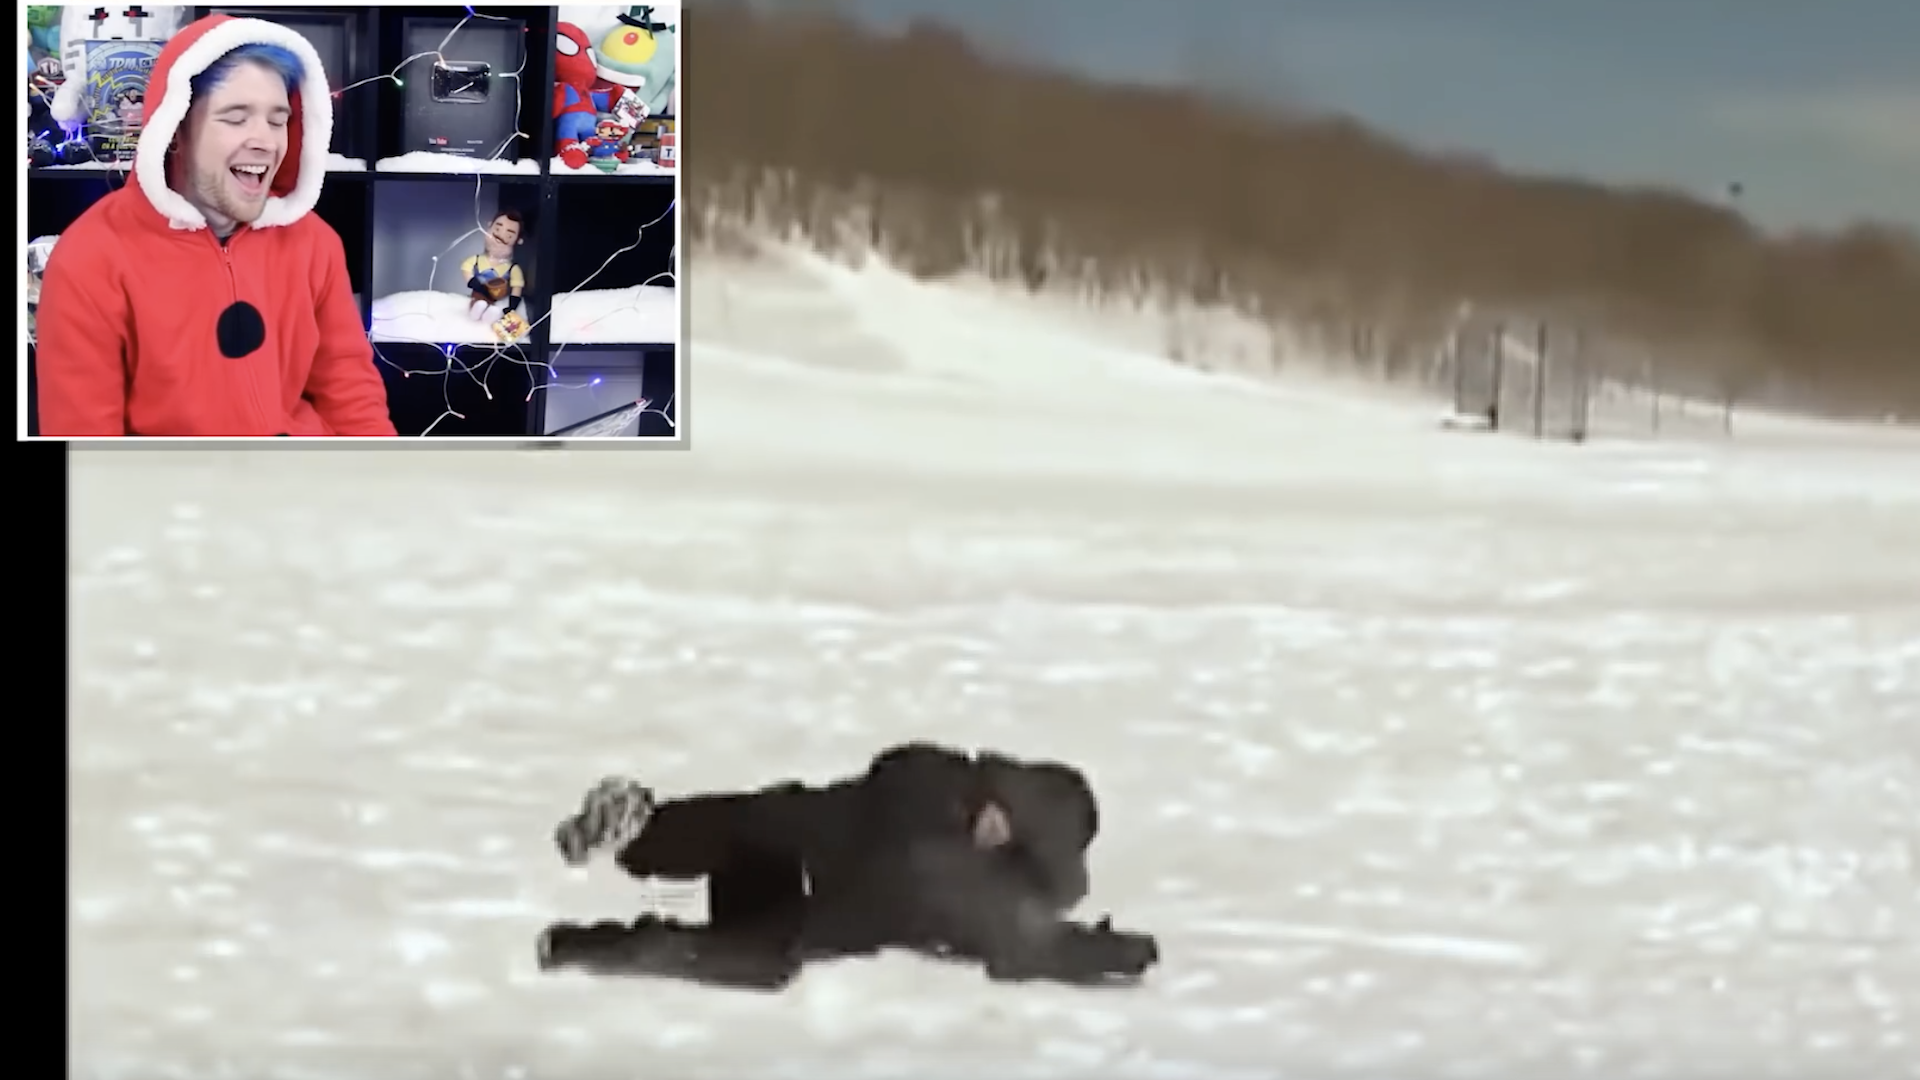 DanTDM watches clips of people falling over in the snow